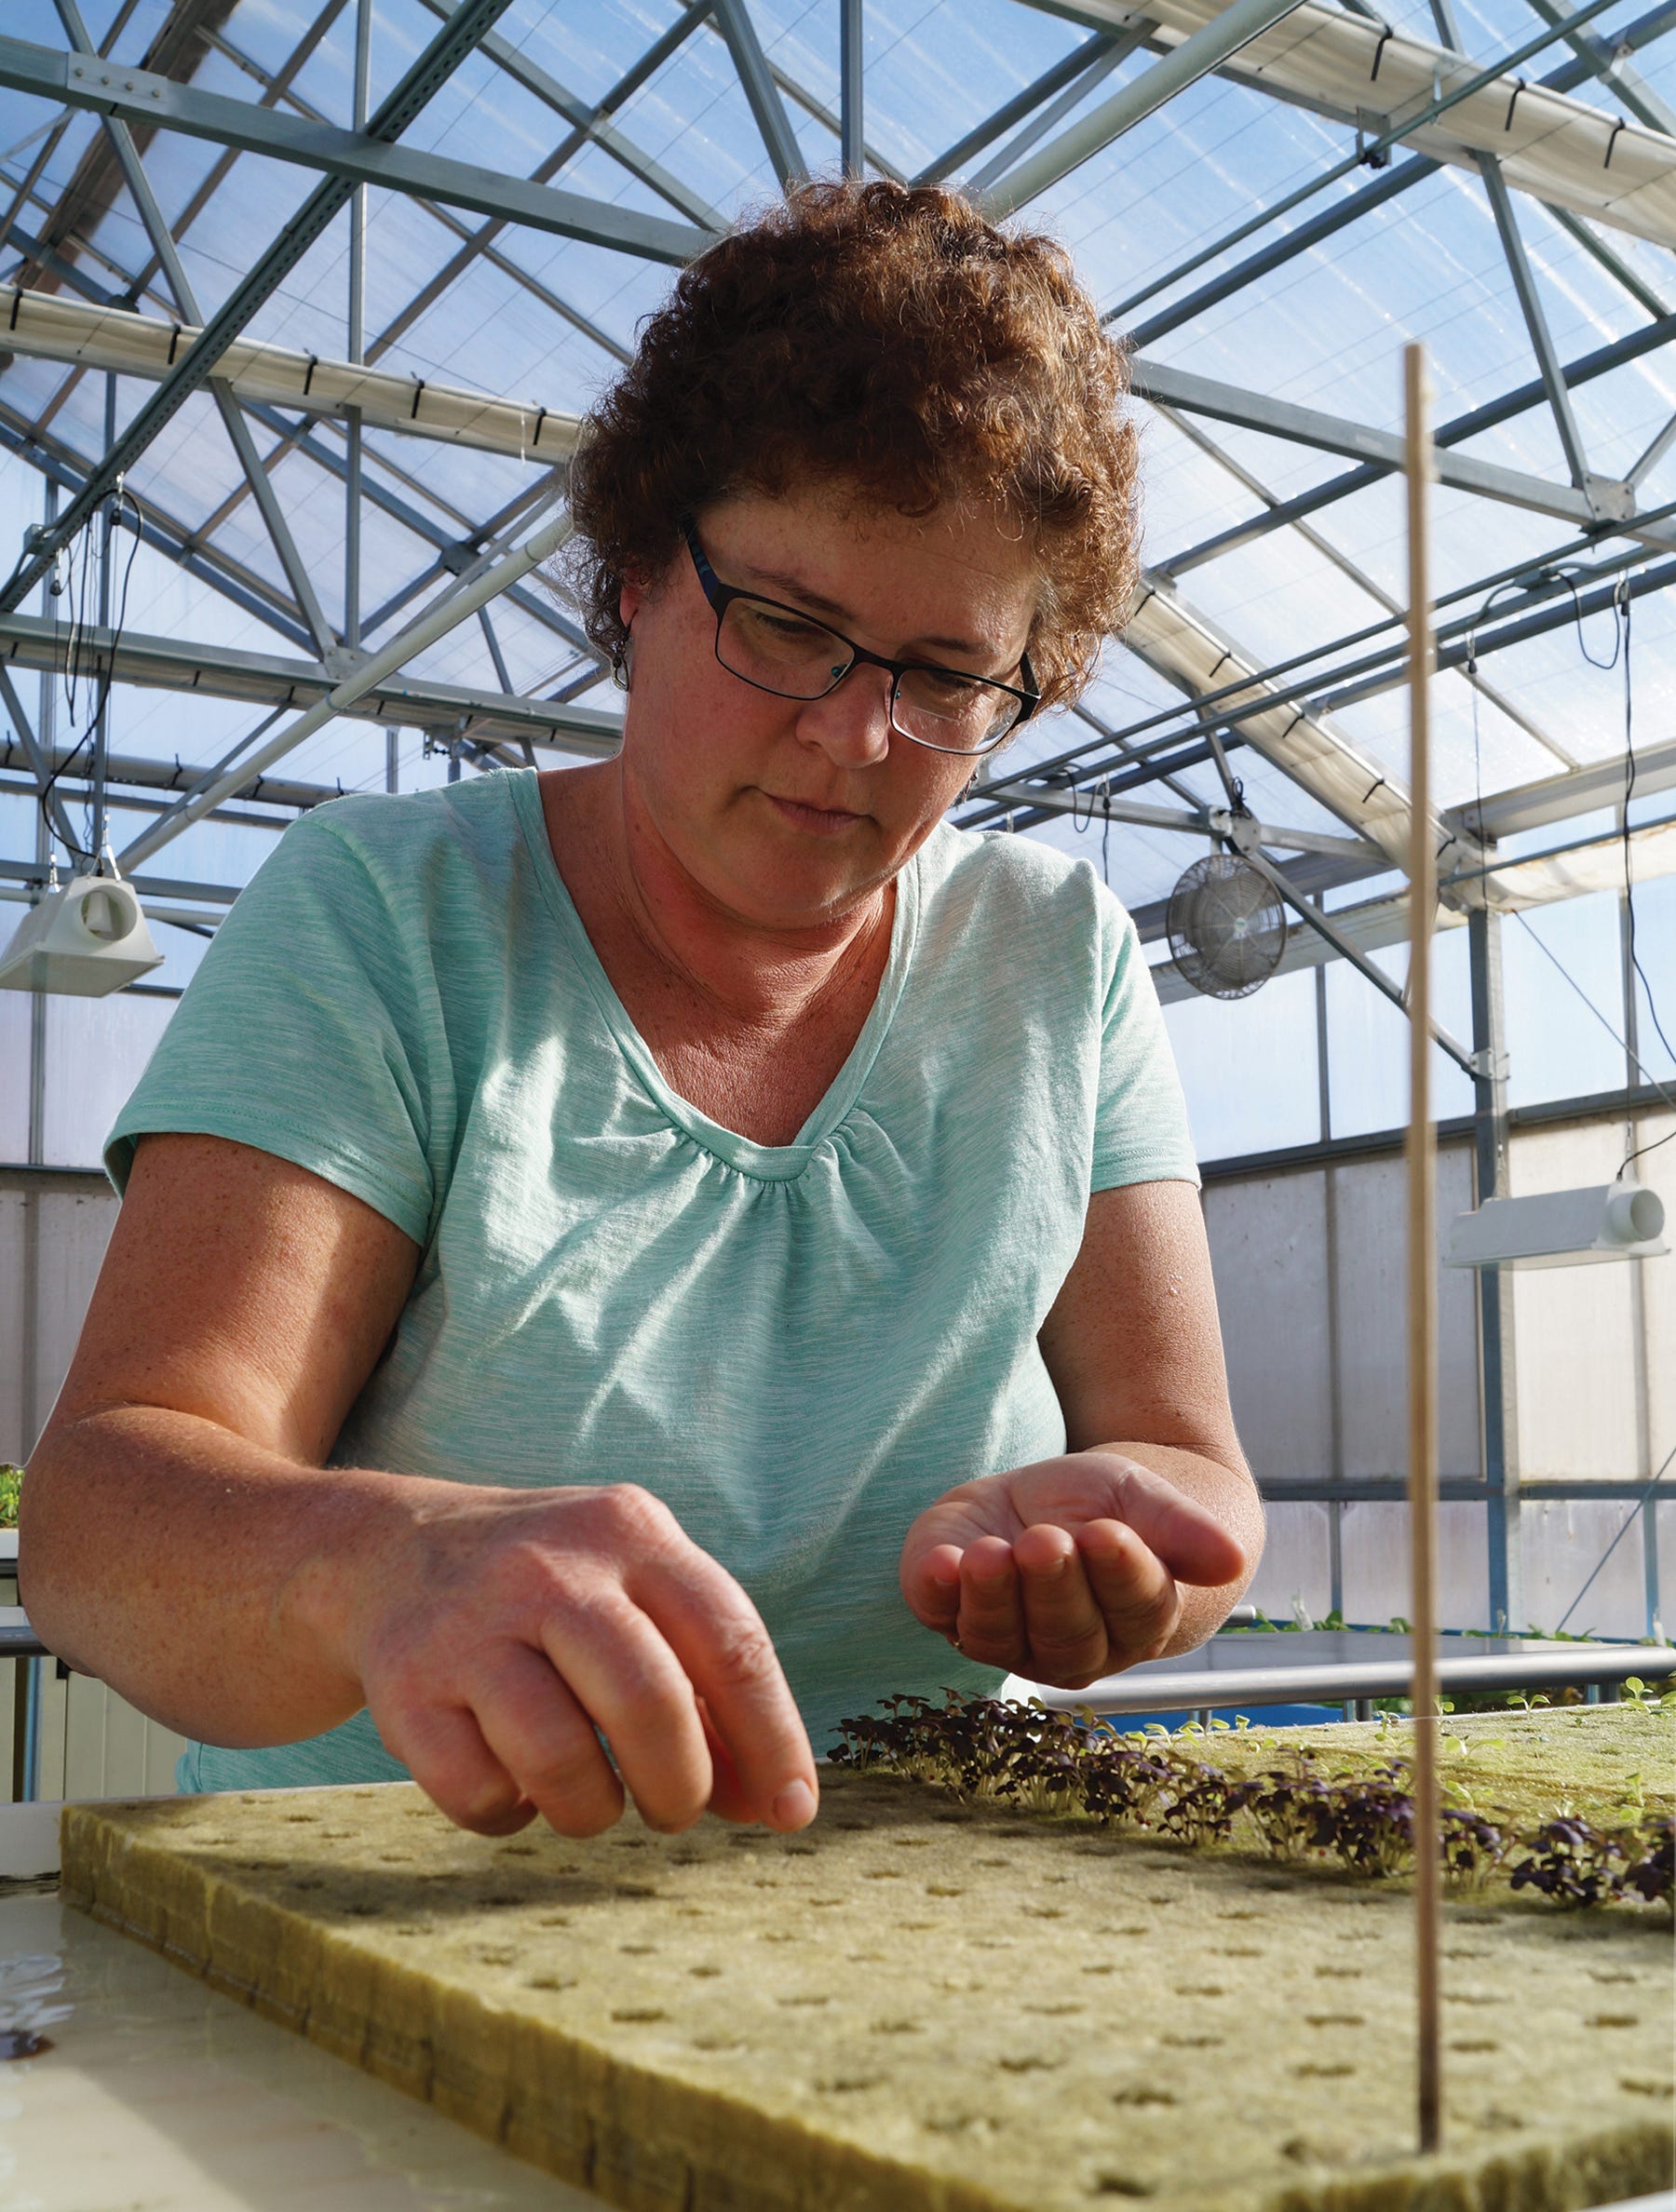 Lois Demmin has worked for Lake Orchard Farm since 2011. She works in the greenhouse and jokingly calls herself the plant relocation specialist.